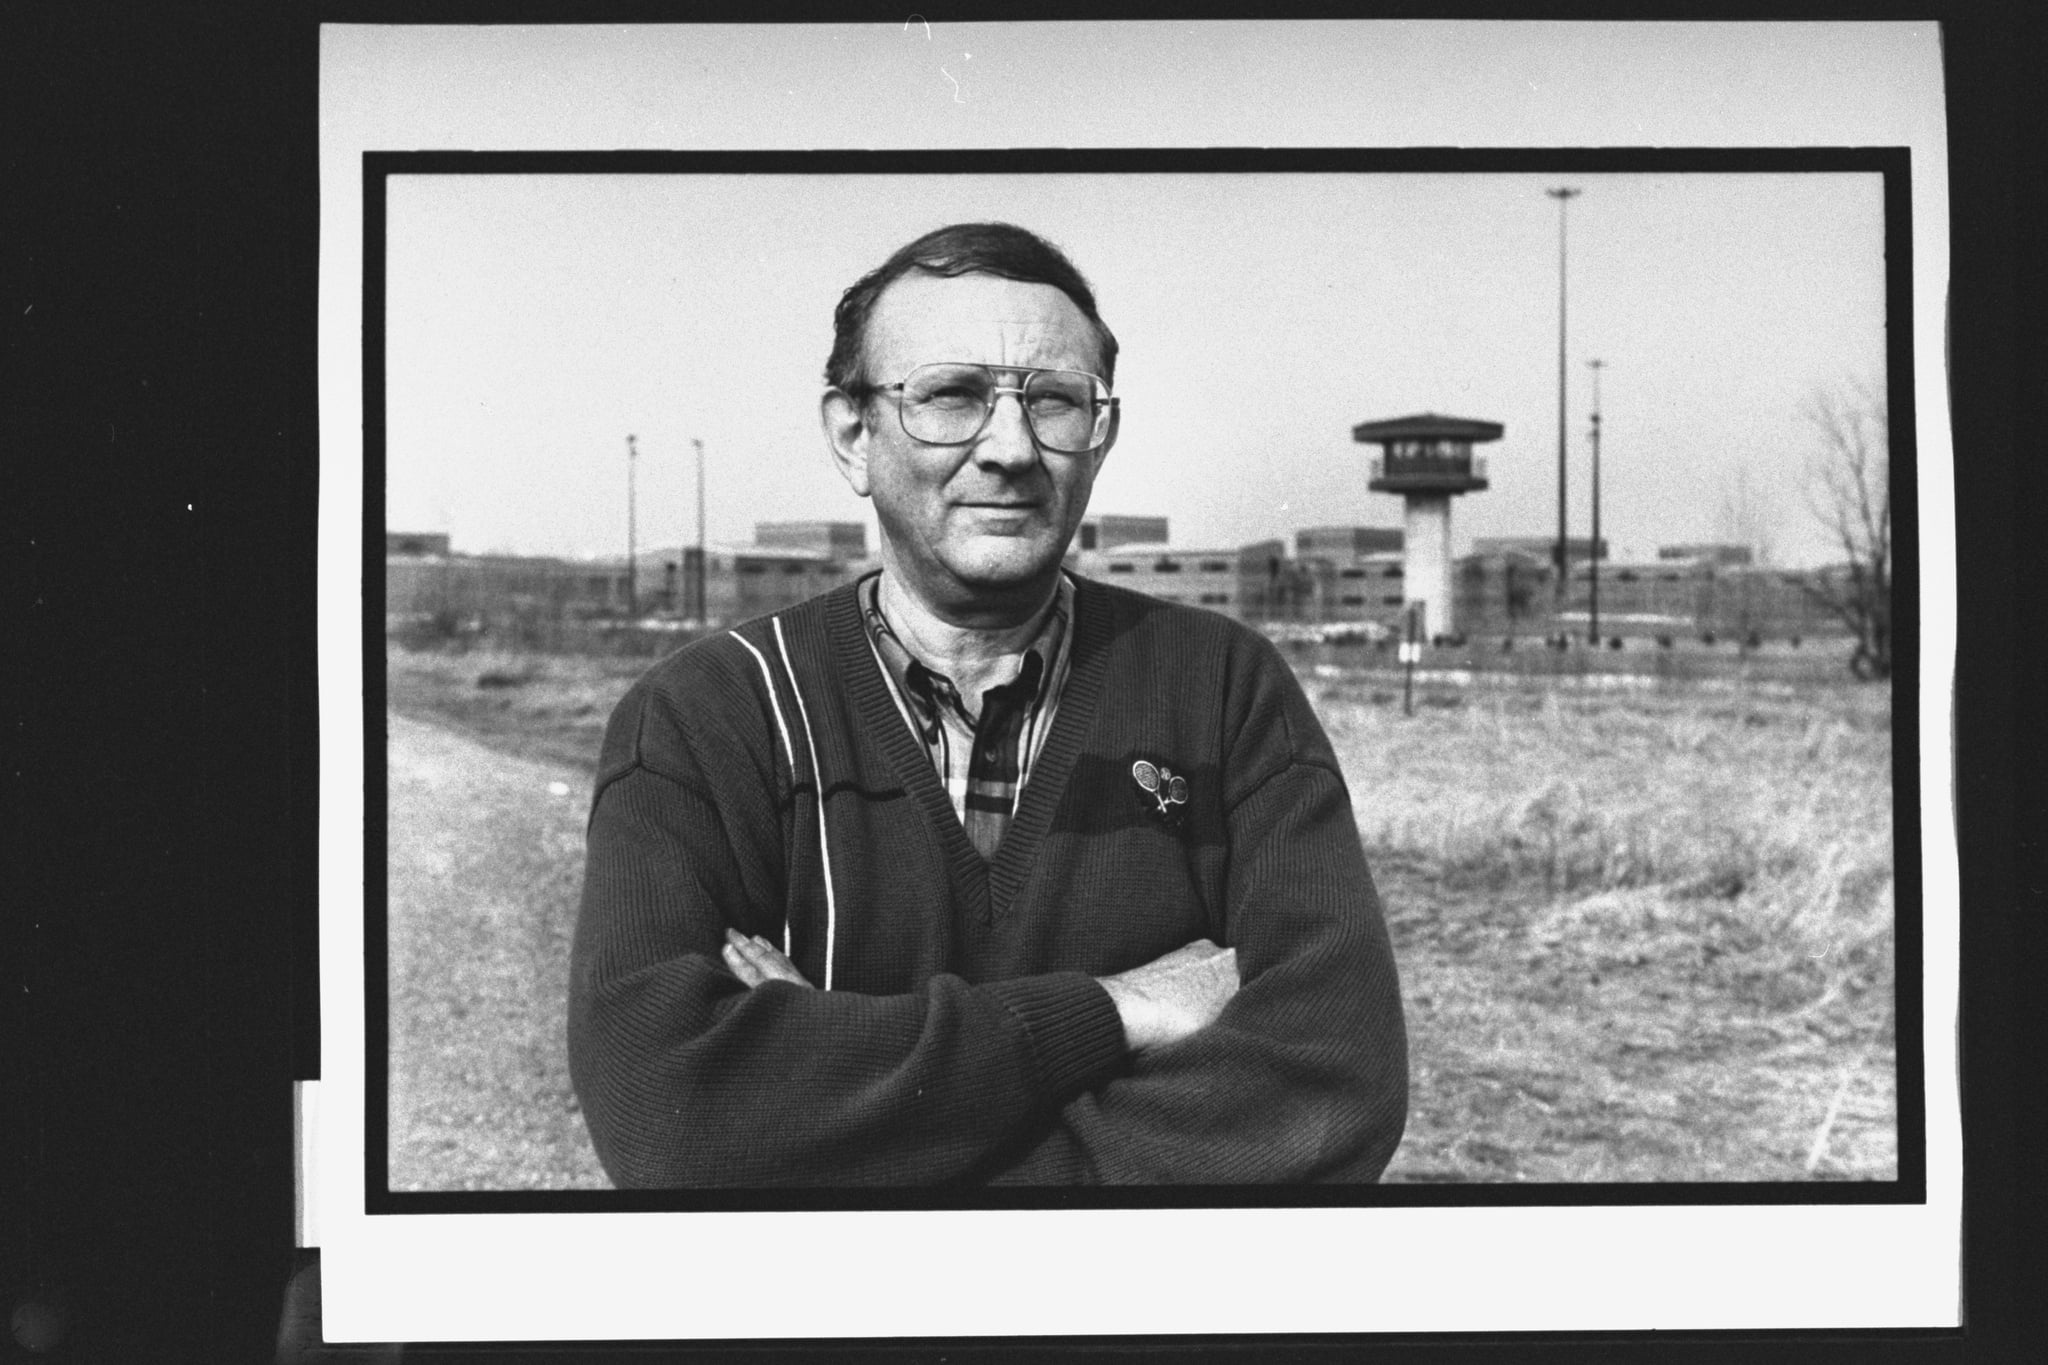 Research chemist/author Lionel Dahmer, father of confessed serial killer Jeffrey Dahmer, standing outside of Columbia Correctional Institute where his son is imprisoned.    (Photo by Steve Kagan/Getty Images)